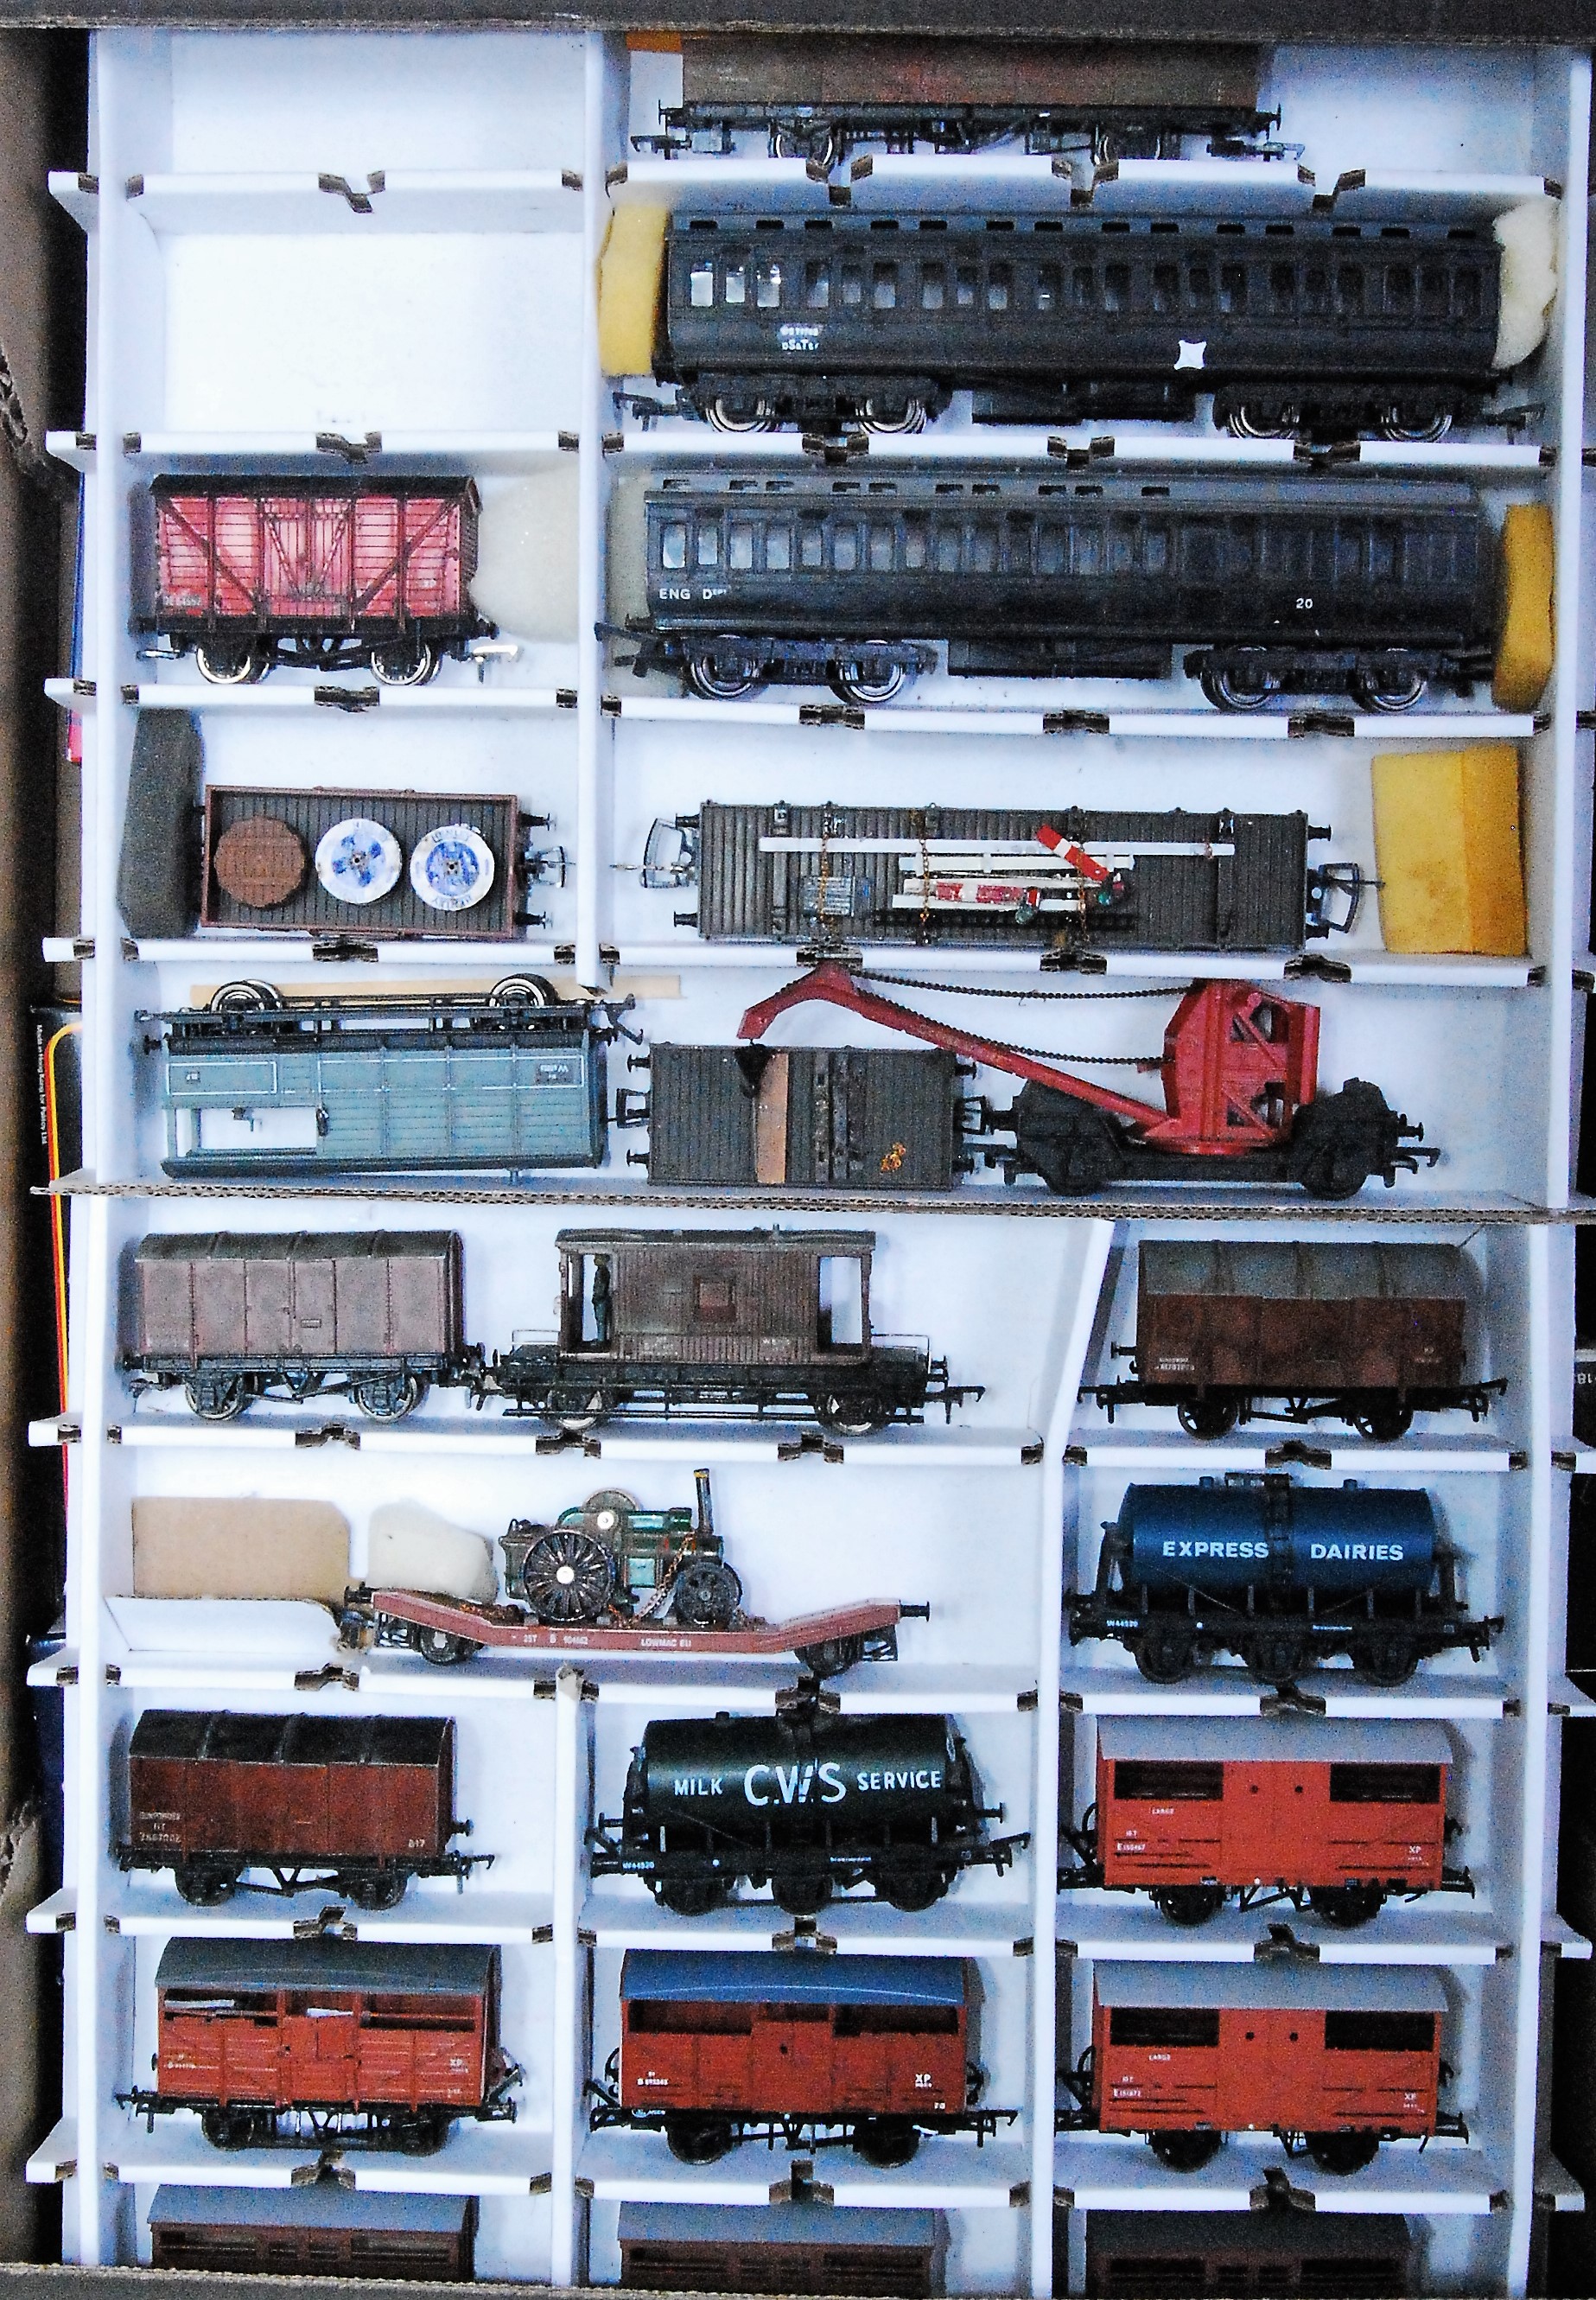 Tray containing a signal engineers train with loco and cattle/goods/milk train, Hornby class 4